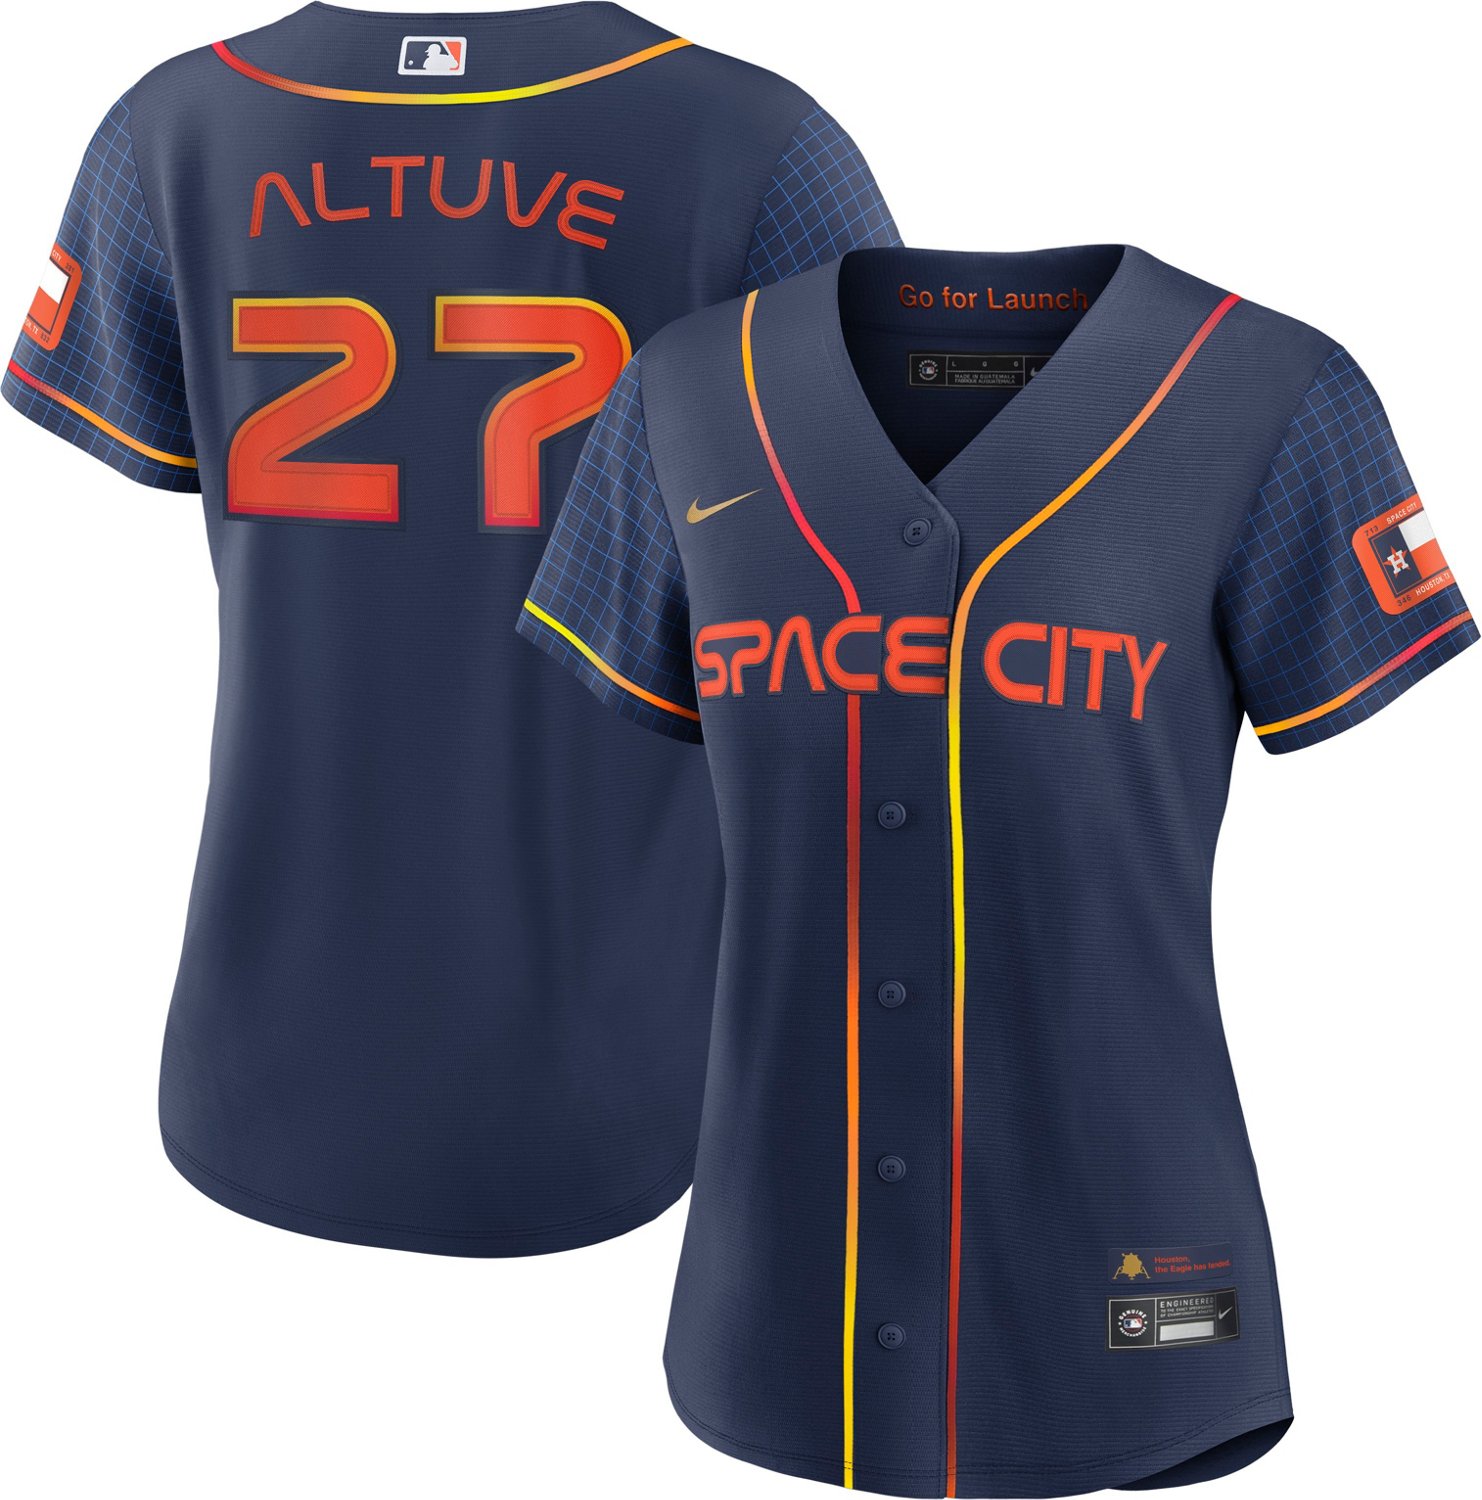 Houston Astros 'Space City' uniform sets record City Connect debut by 329  percent over 2nd best launch - ABC13 Houston